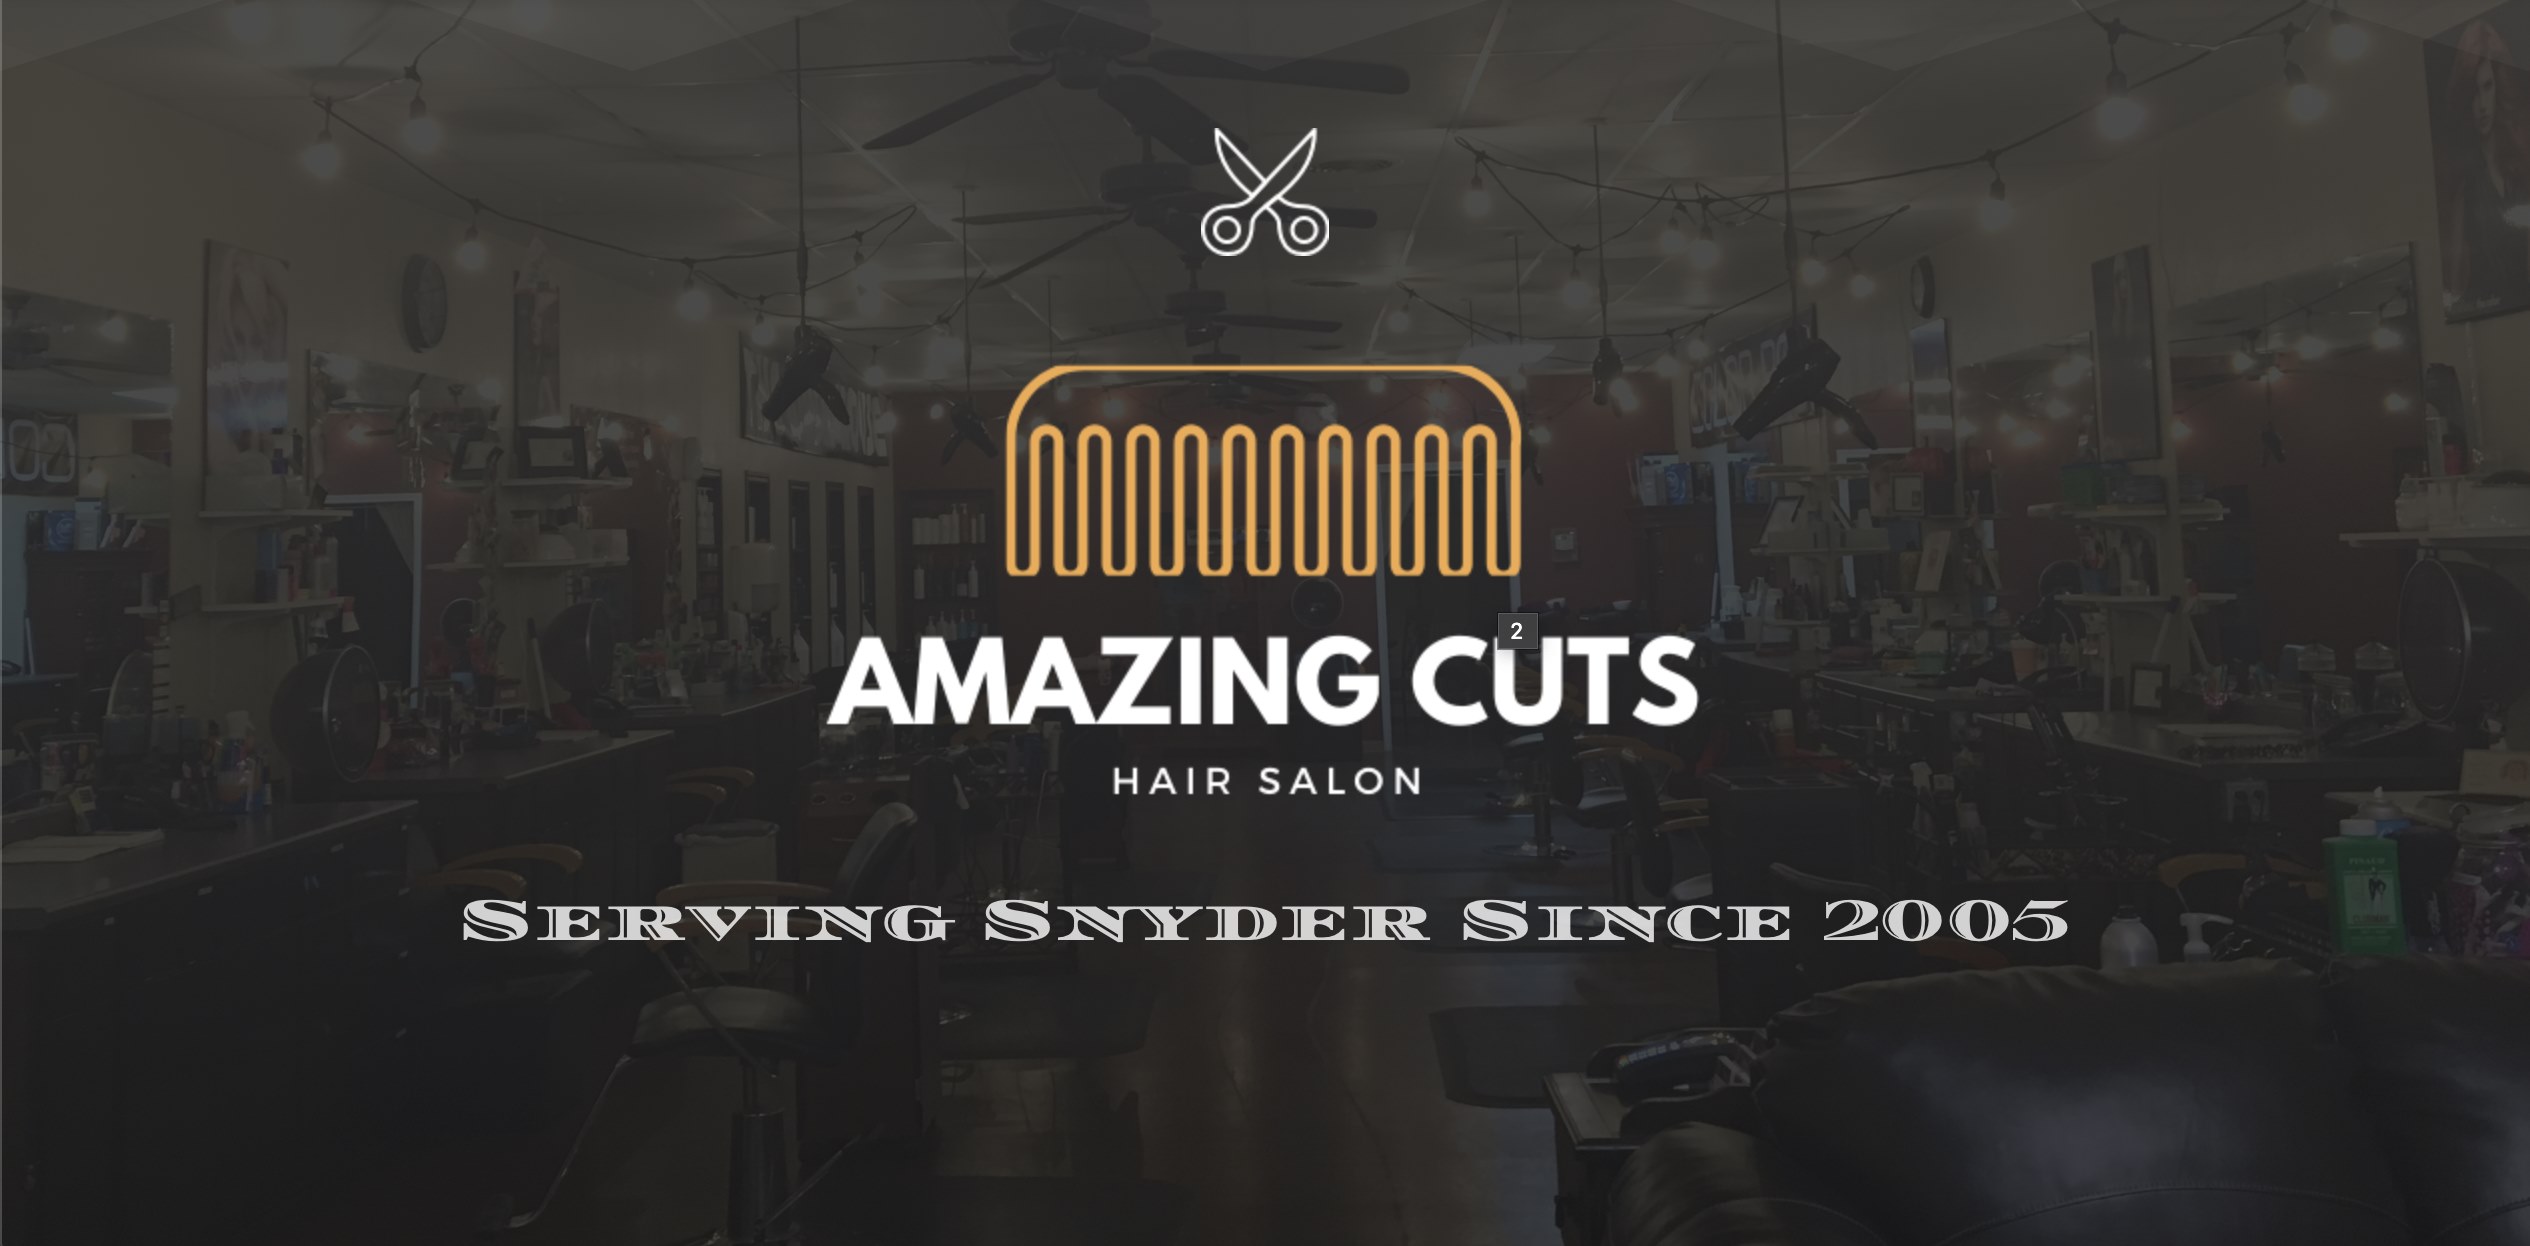 Amazing Cuts 4109 College Ave # B, Snyder Texas 79549